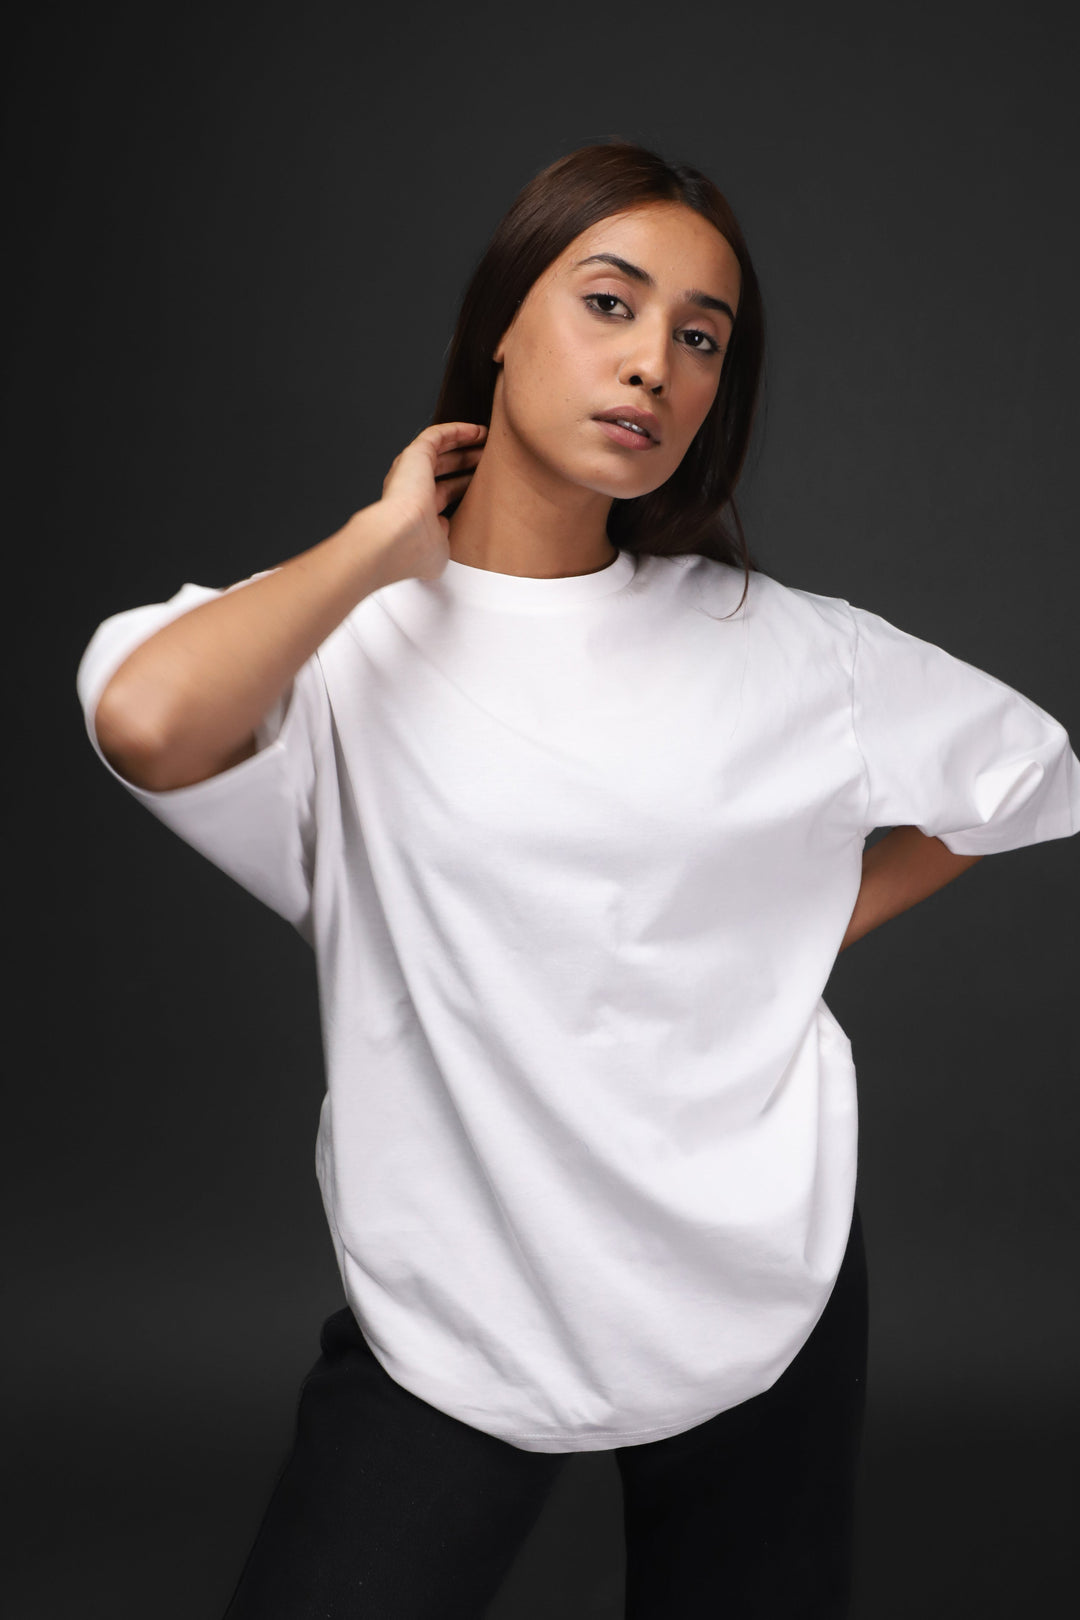 Over Size Tee - Women's White Over Size Tee#48